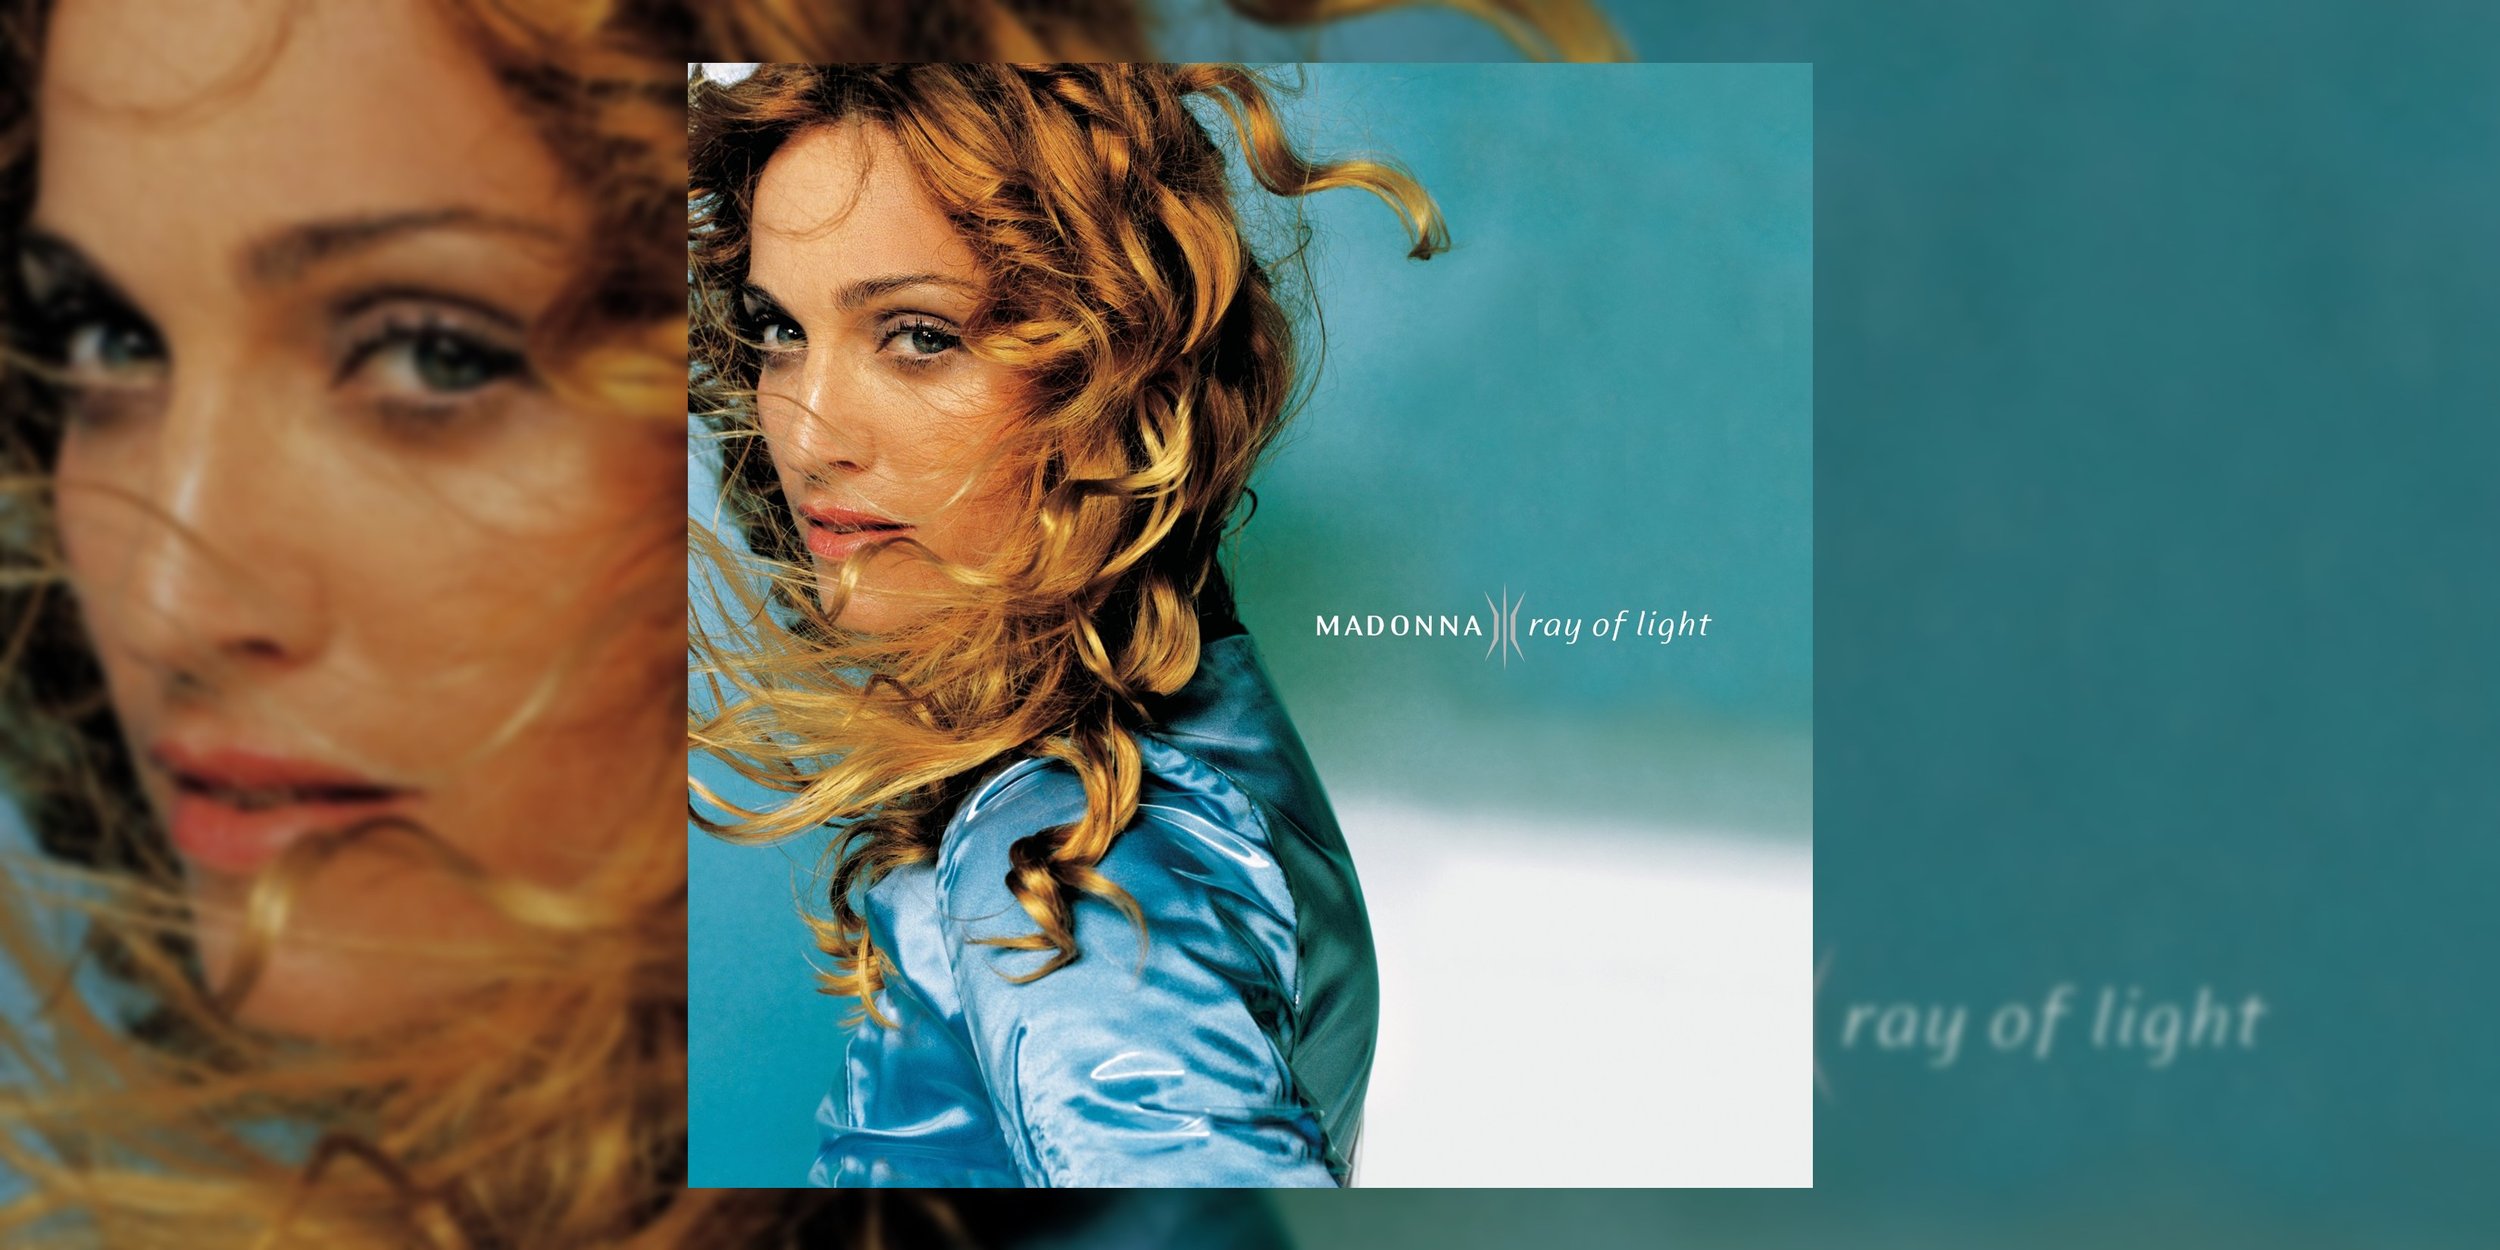 Madonna's 'Ray of Light' Turns 25 | Read the Anniversary Tribute